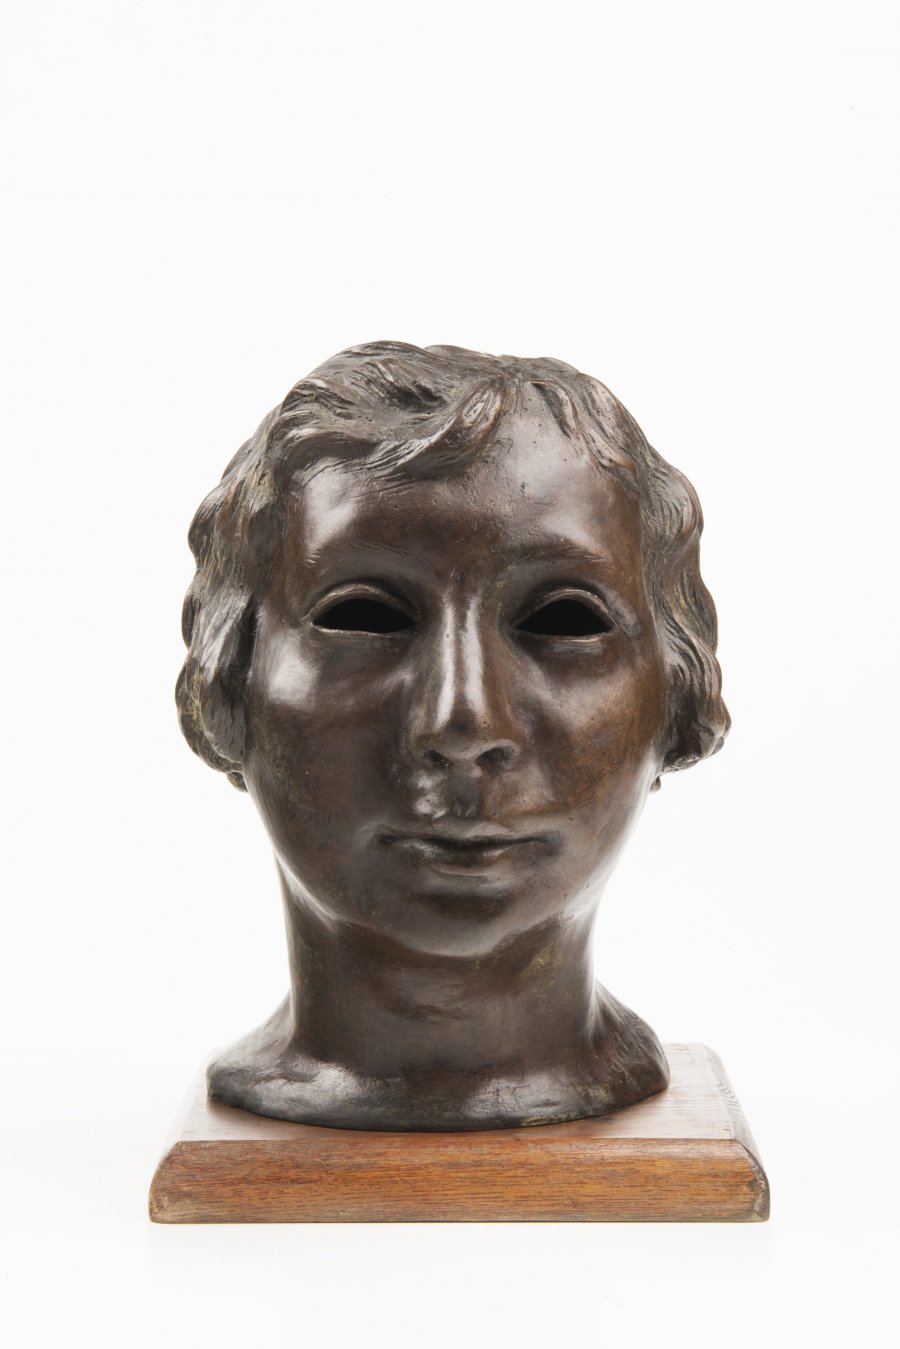 GIRL'S HEAD (WITH HOLLOW EYES)